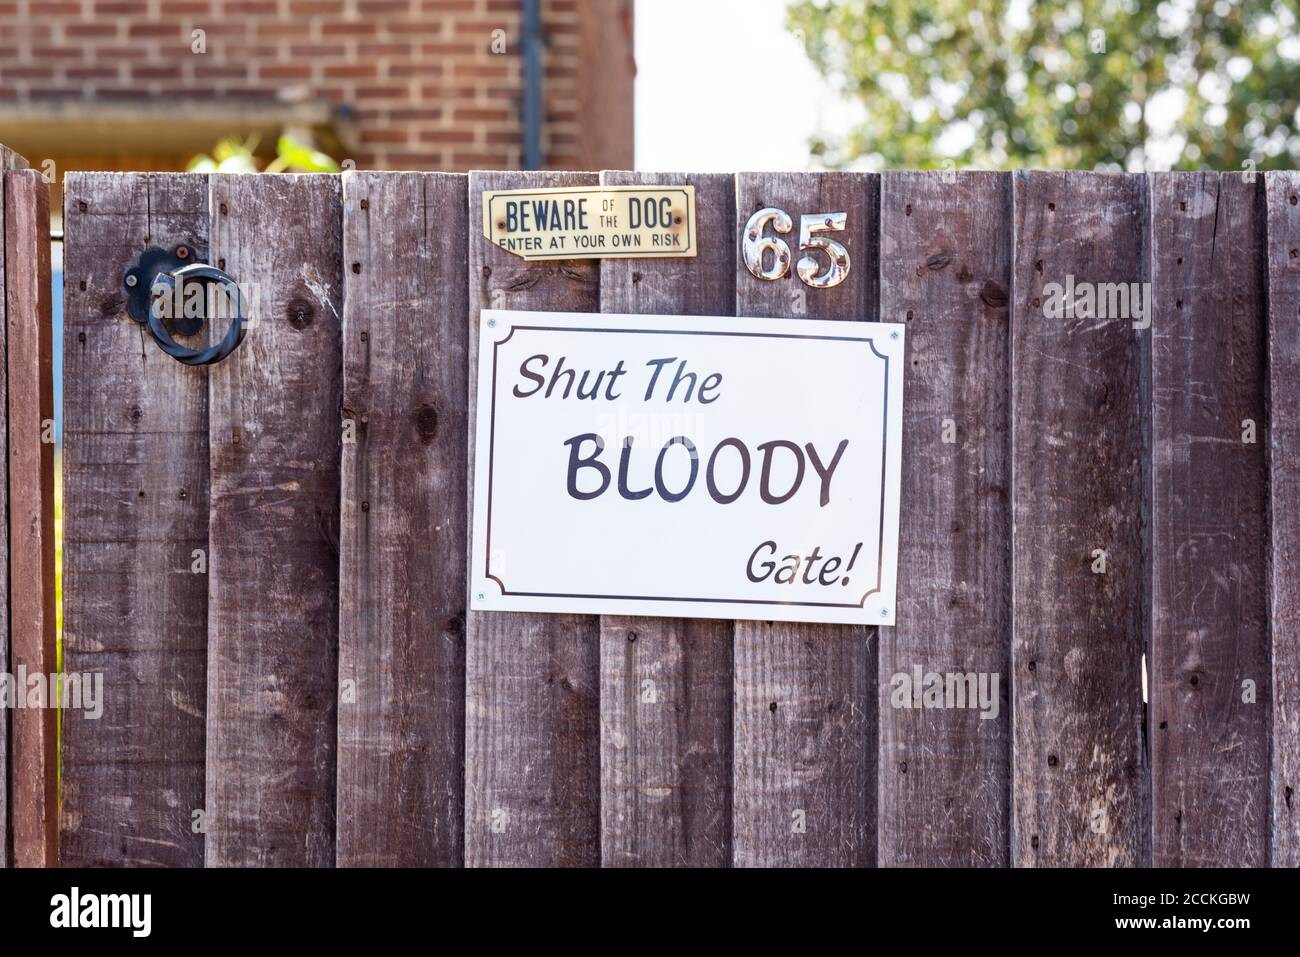 House garden gate with shut the bloody gate sign. Forceful message on garden gate. Offensive word, expletive, used with impact to get message across Stock Photo